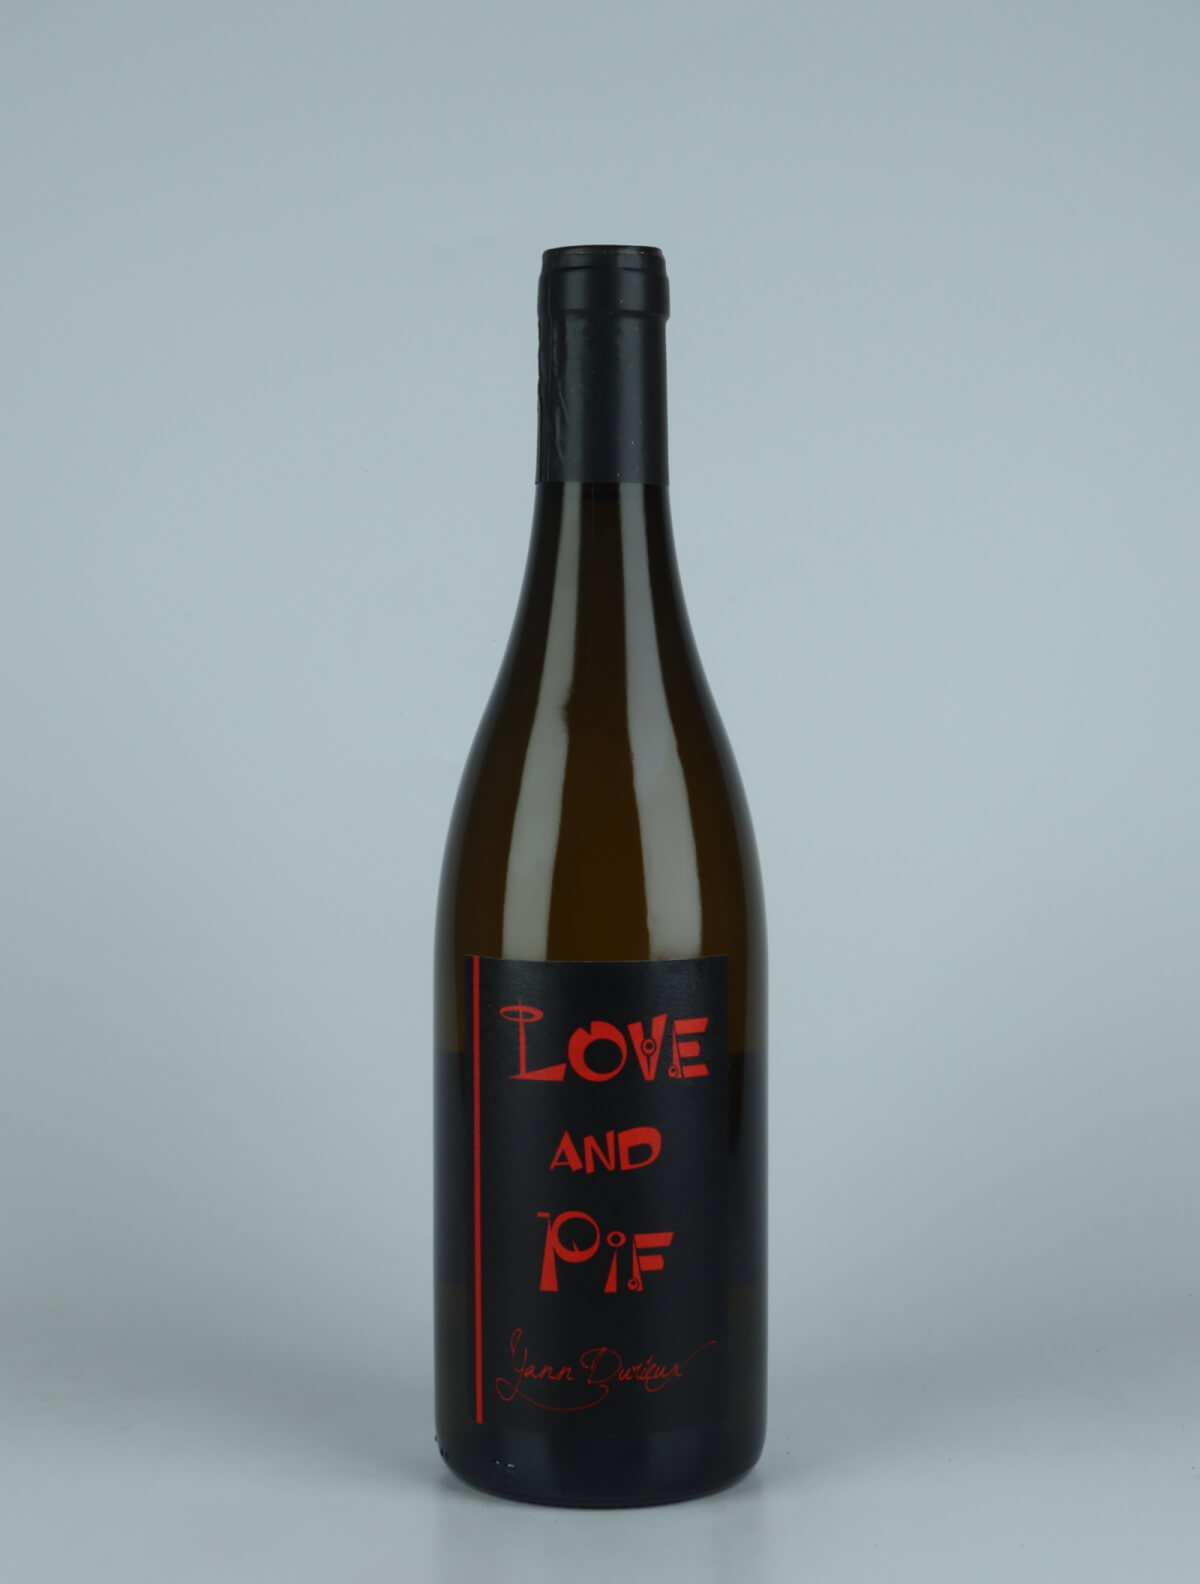 A bottle 2021 Aligoté - Love and Pif White wine from Yann Durieux, Burgundy in France